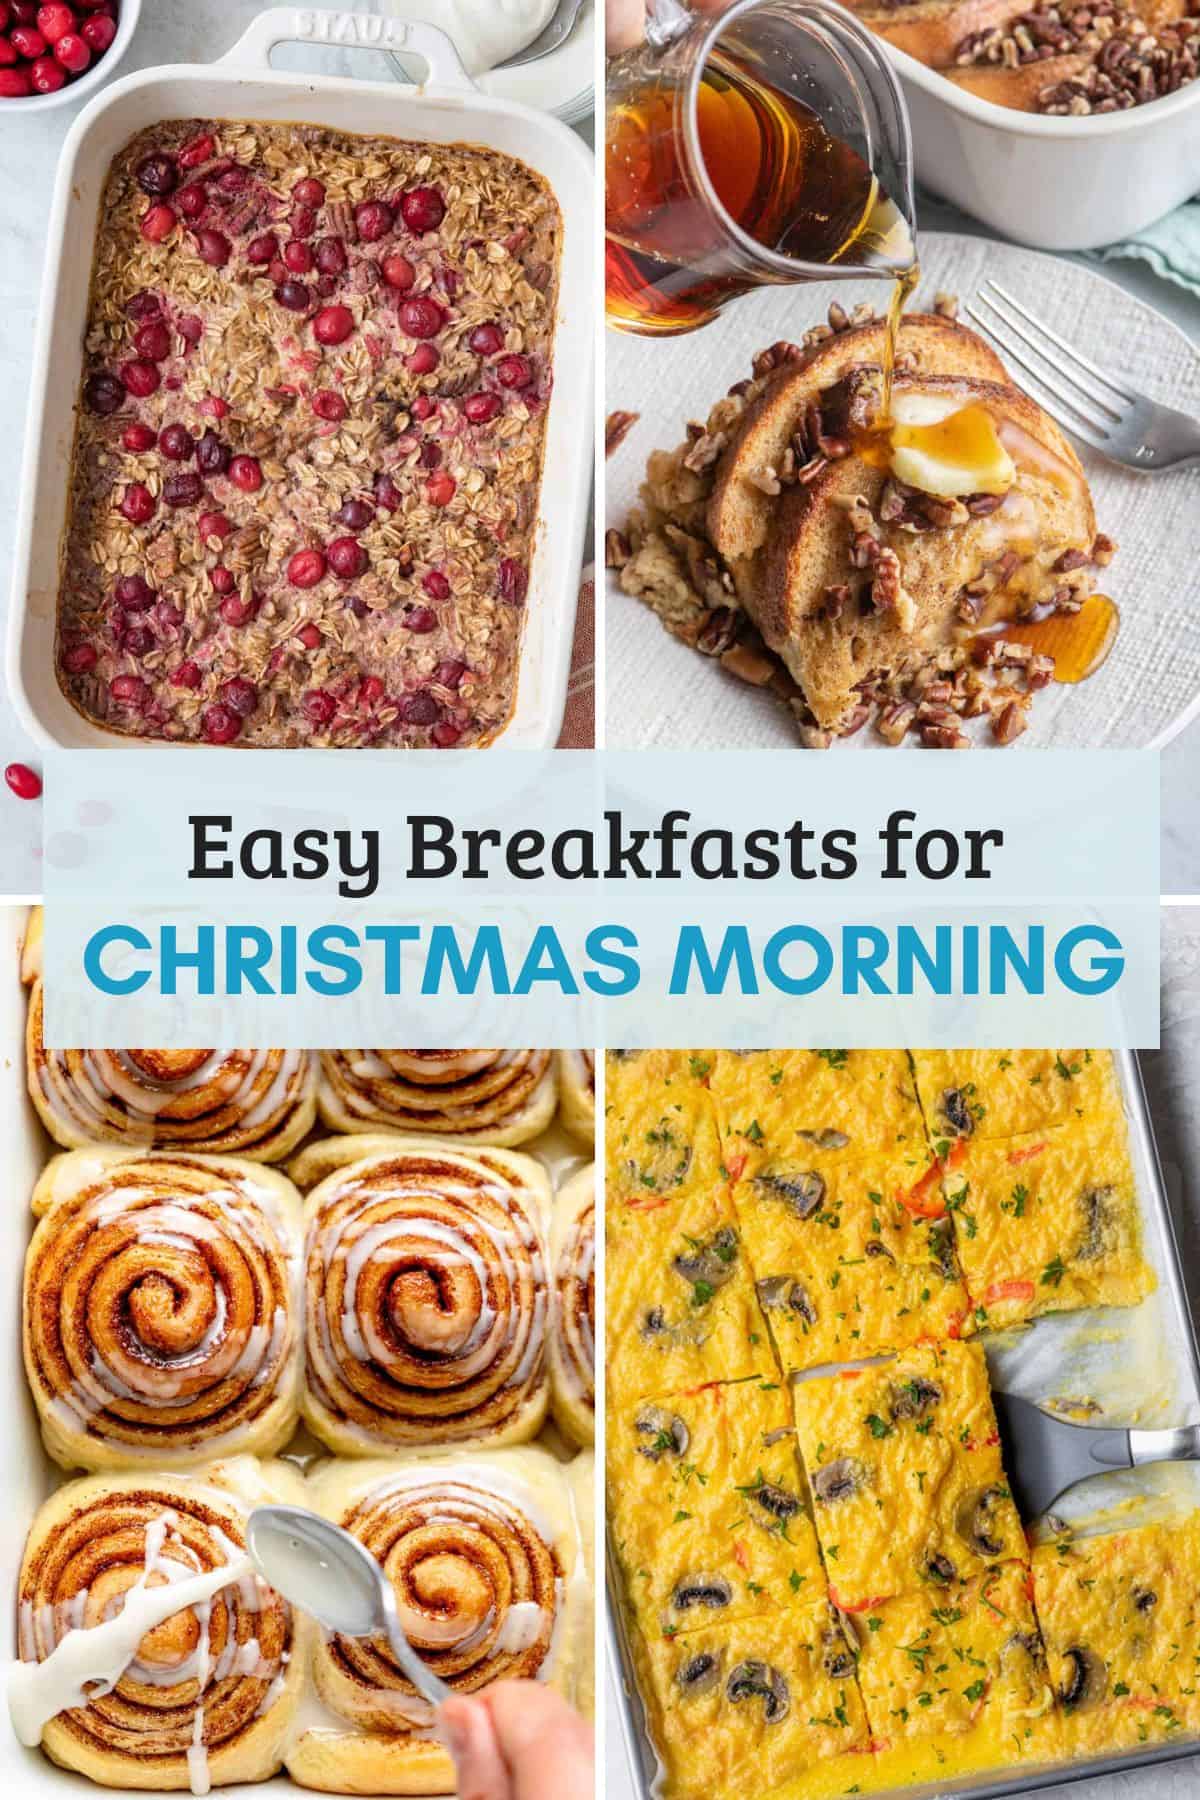 Cover featured photo for christmas morning breakfasts